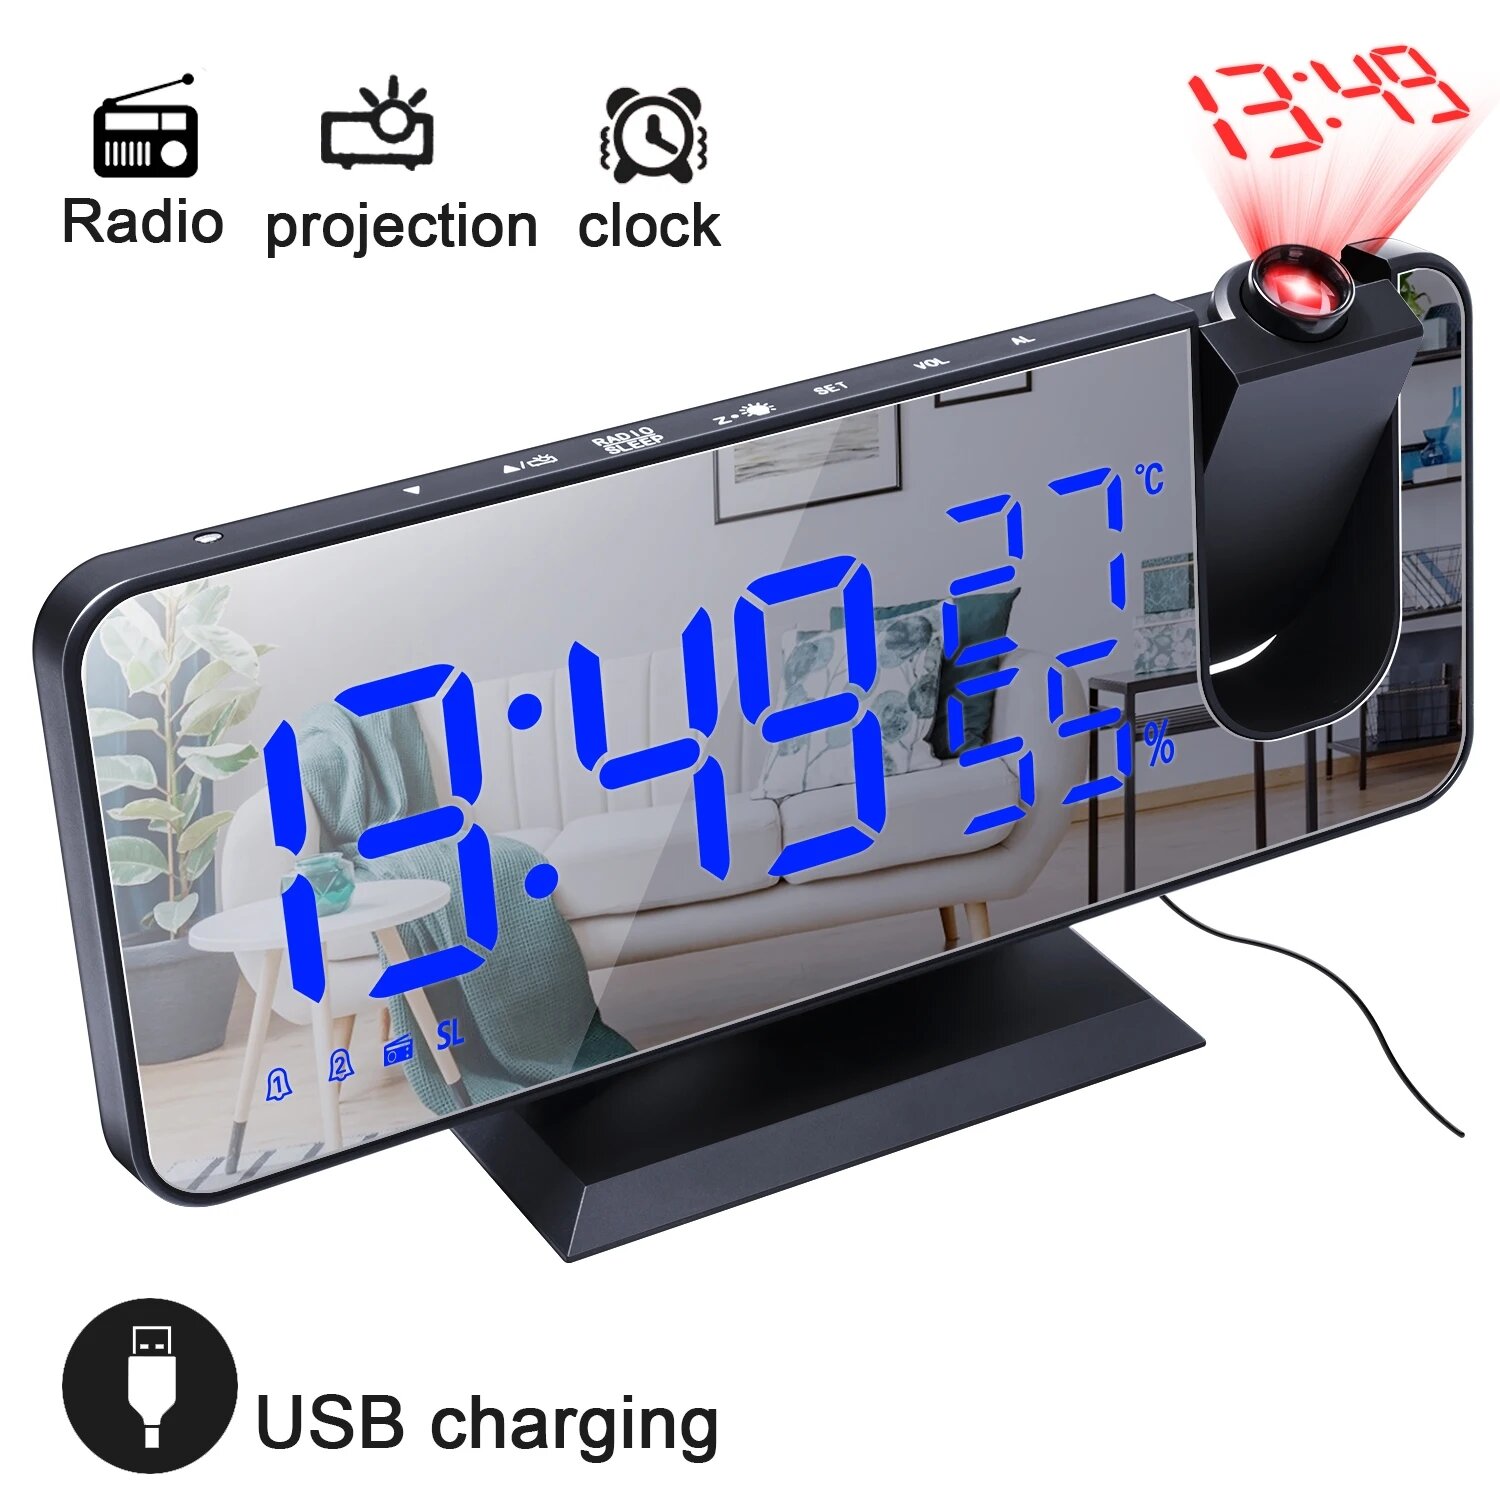 

LED Mirror Alarm Clock Big Screen Temperature and Humidity Display with Radio and Time Projection Function Electronic Cl